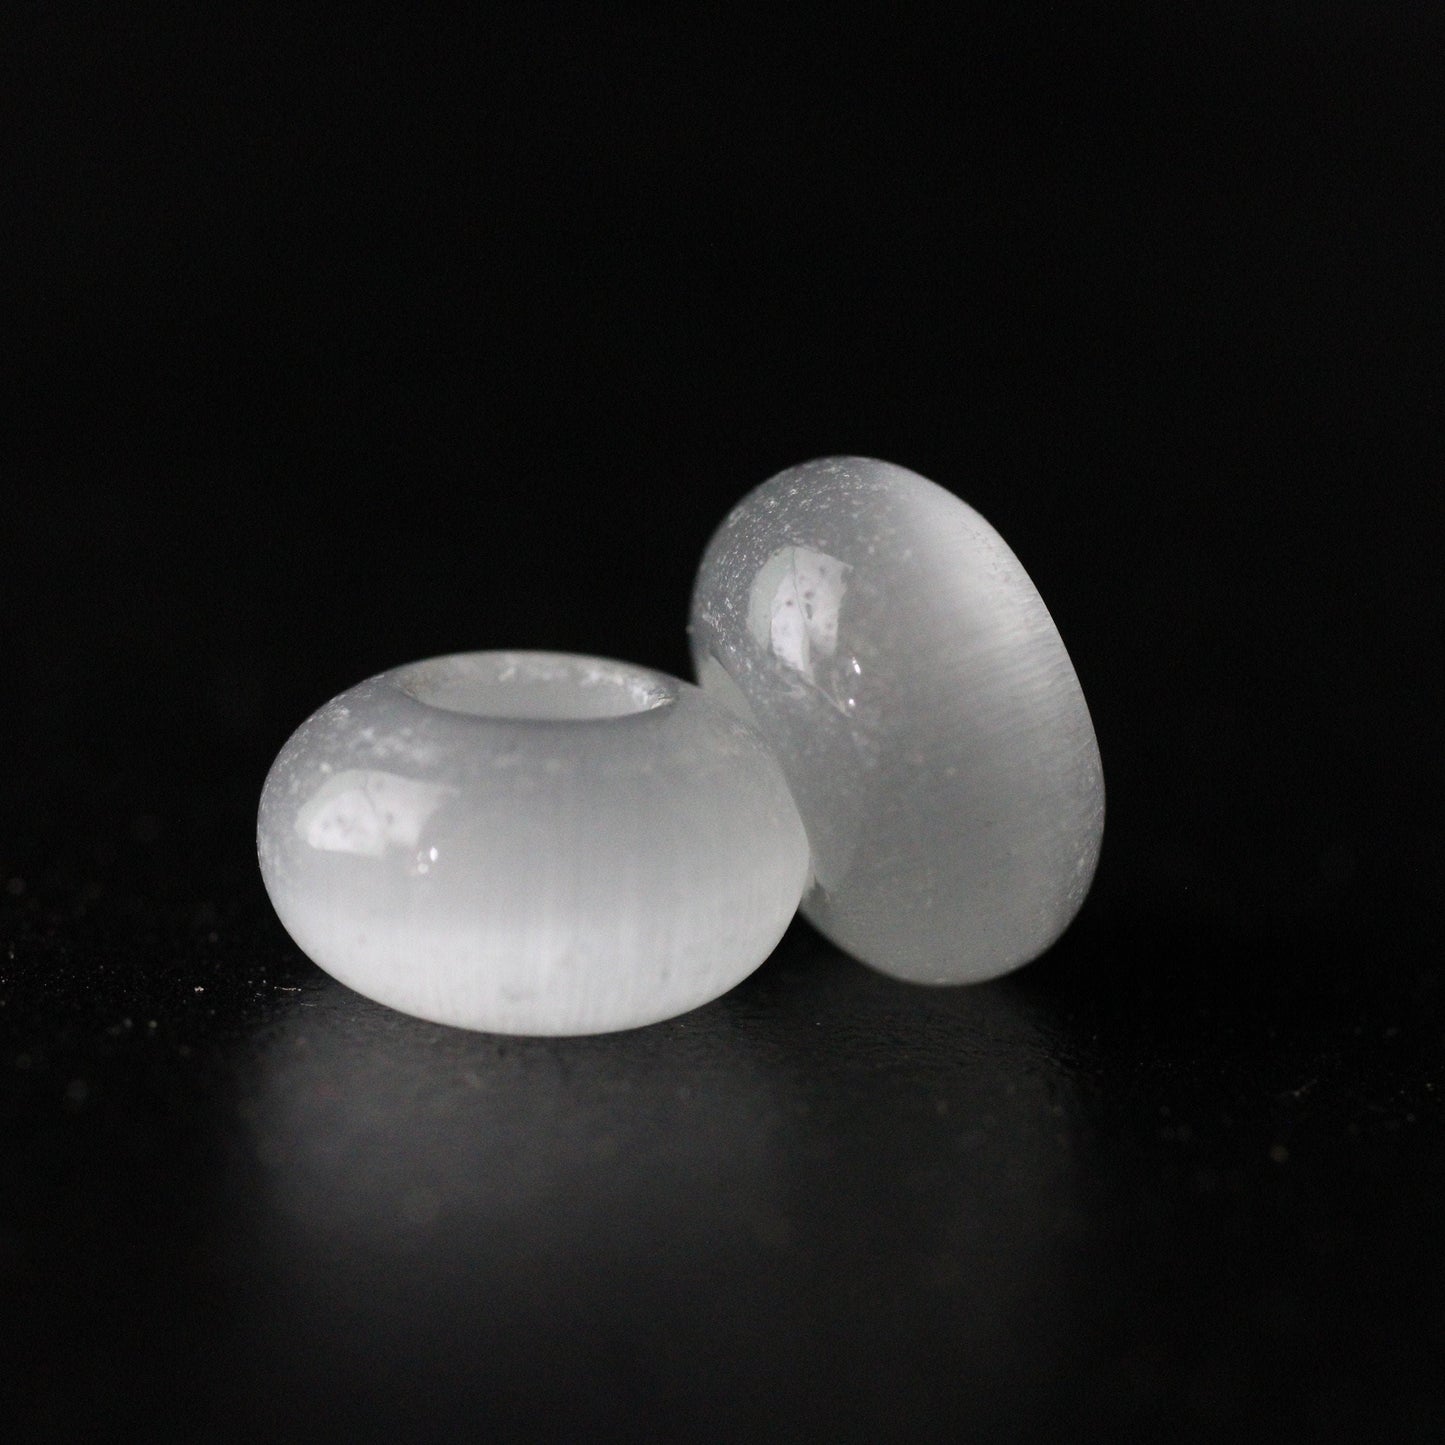 2 White Glass Cats Eye Dread Beads -  6mm Bead Hole - DreadLock Beads, Dread Beads and Accessories, Hair Beads, Dread Jewelry, 4D029